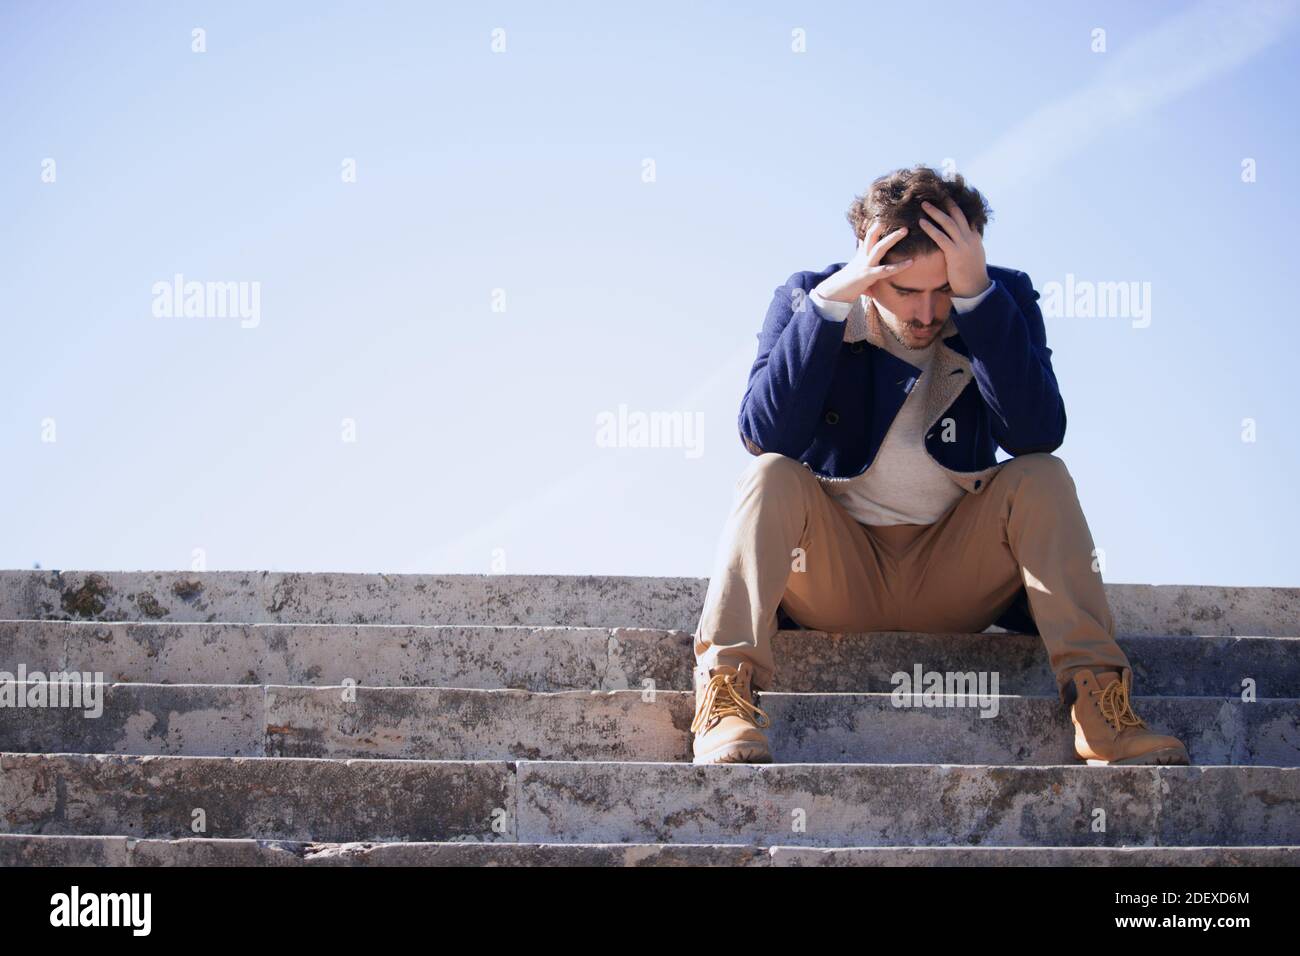 Panoramic young man aged 24-30 sitting in the street frustrated after being fired from his last job. Disgruntled man loses his office job. Stock Photo